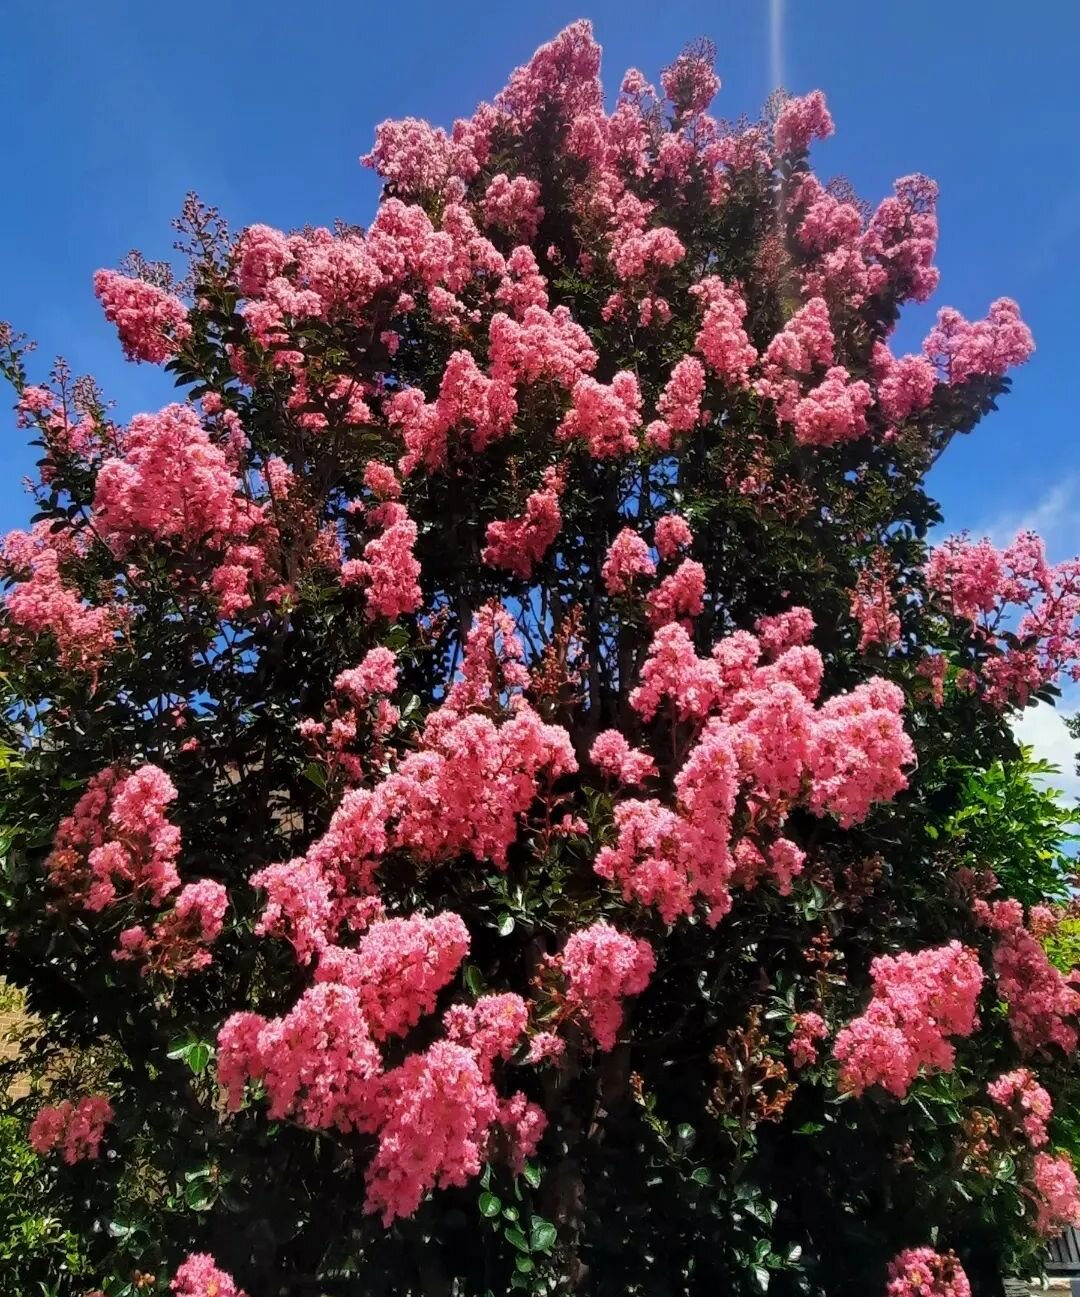 all hail the mighty Crepe Myrtle #crepemyrtlesofinstagram